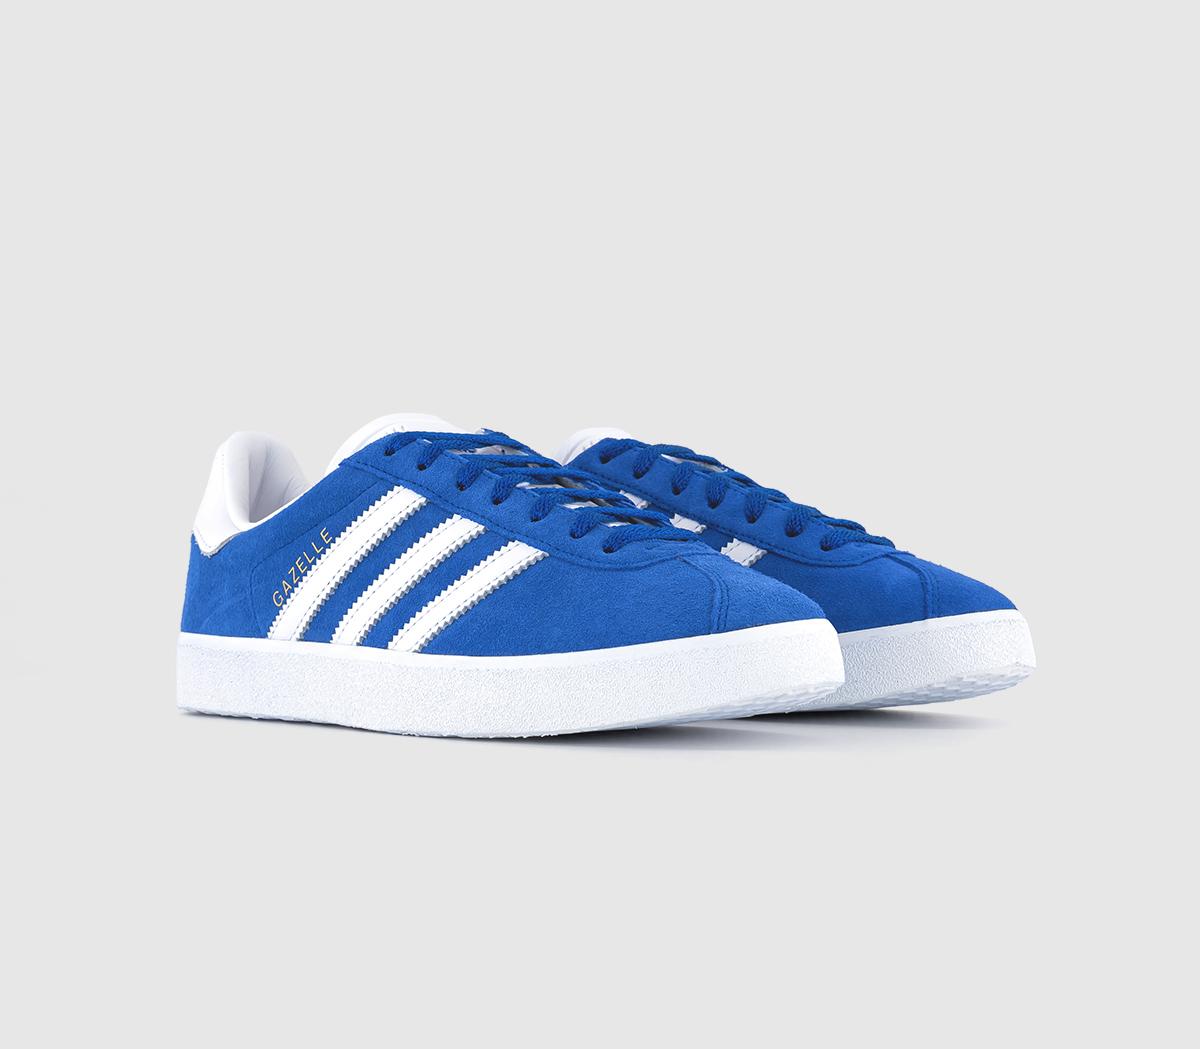 Adidas Womens Gazelle 85 Trainers Royal Blue White Gold Met, 9.5